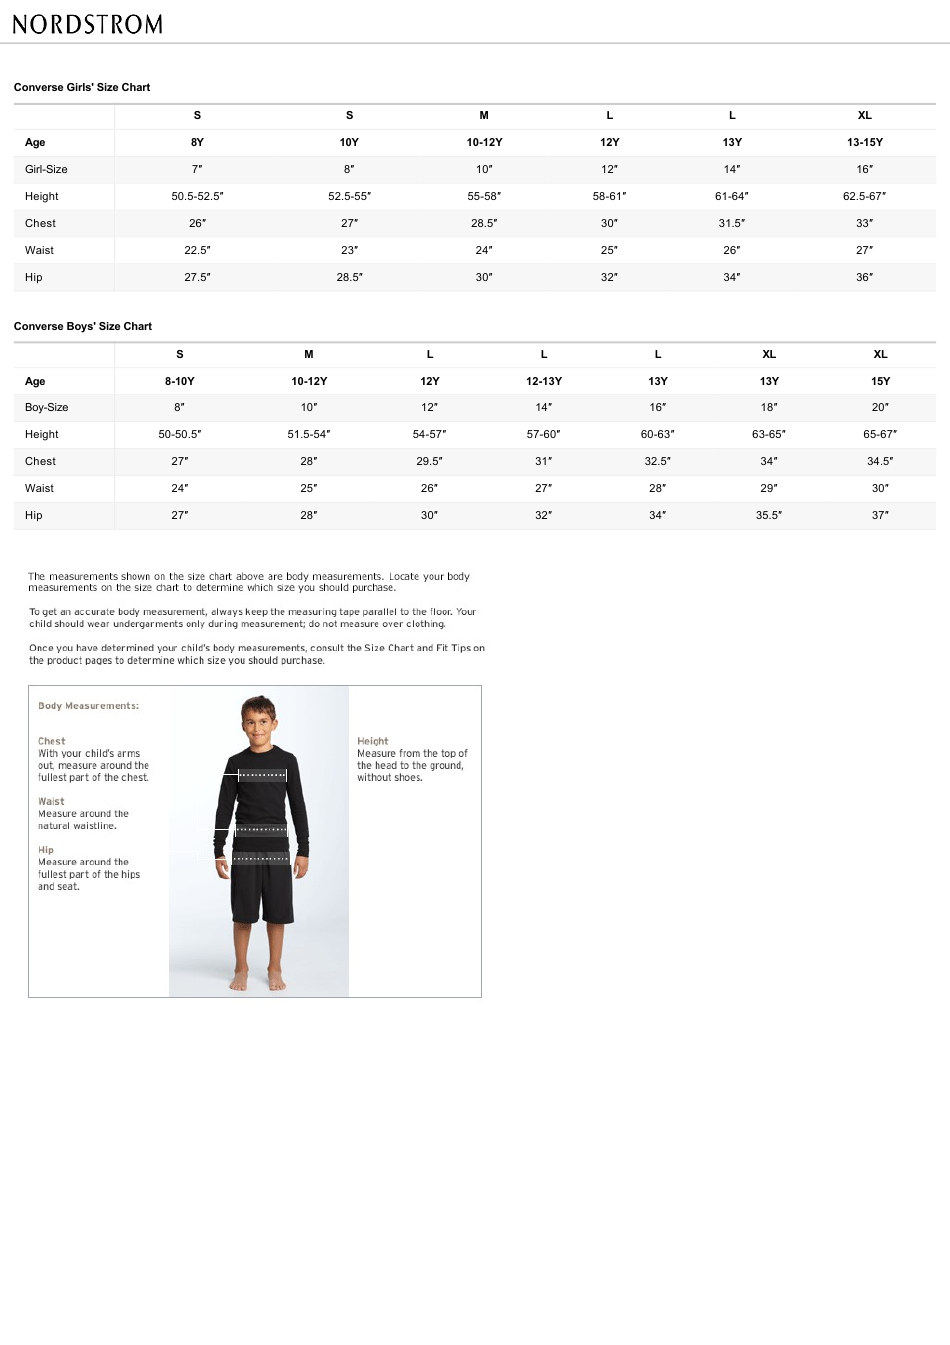 Girls and Boys Size Chart - Converse, Page 1